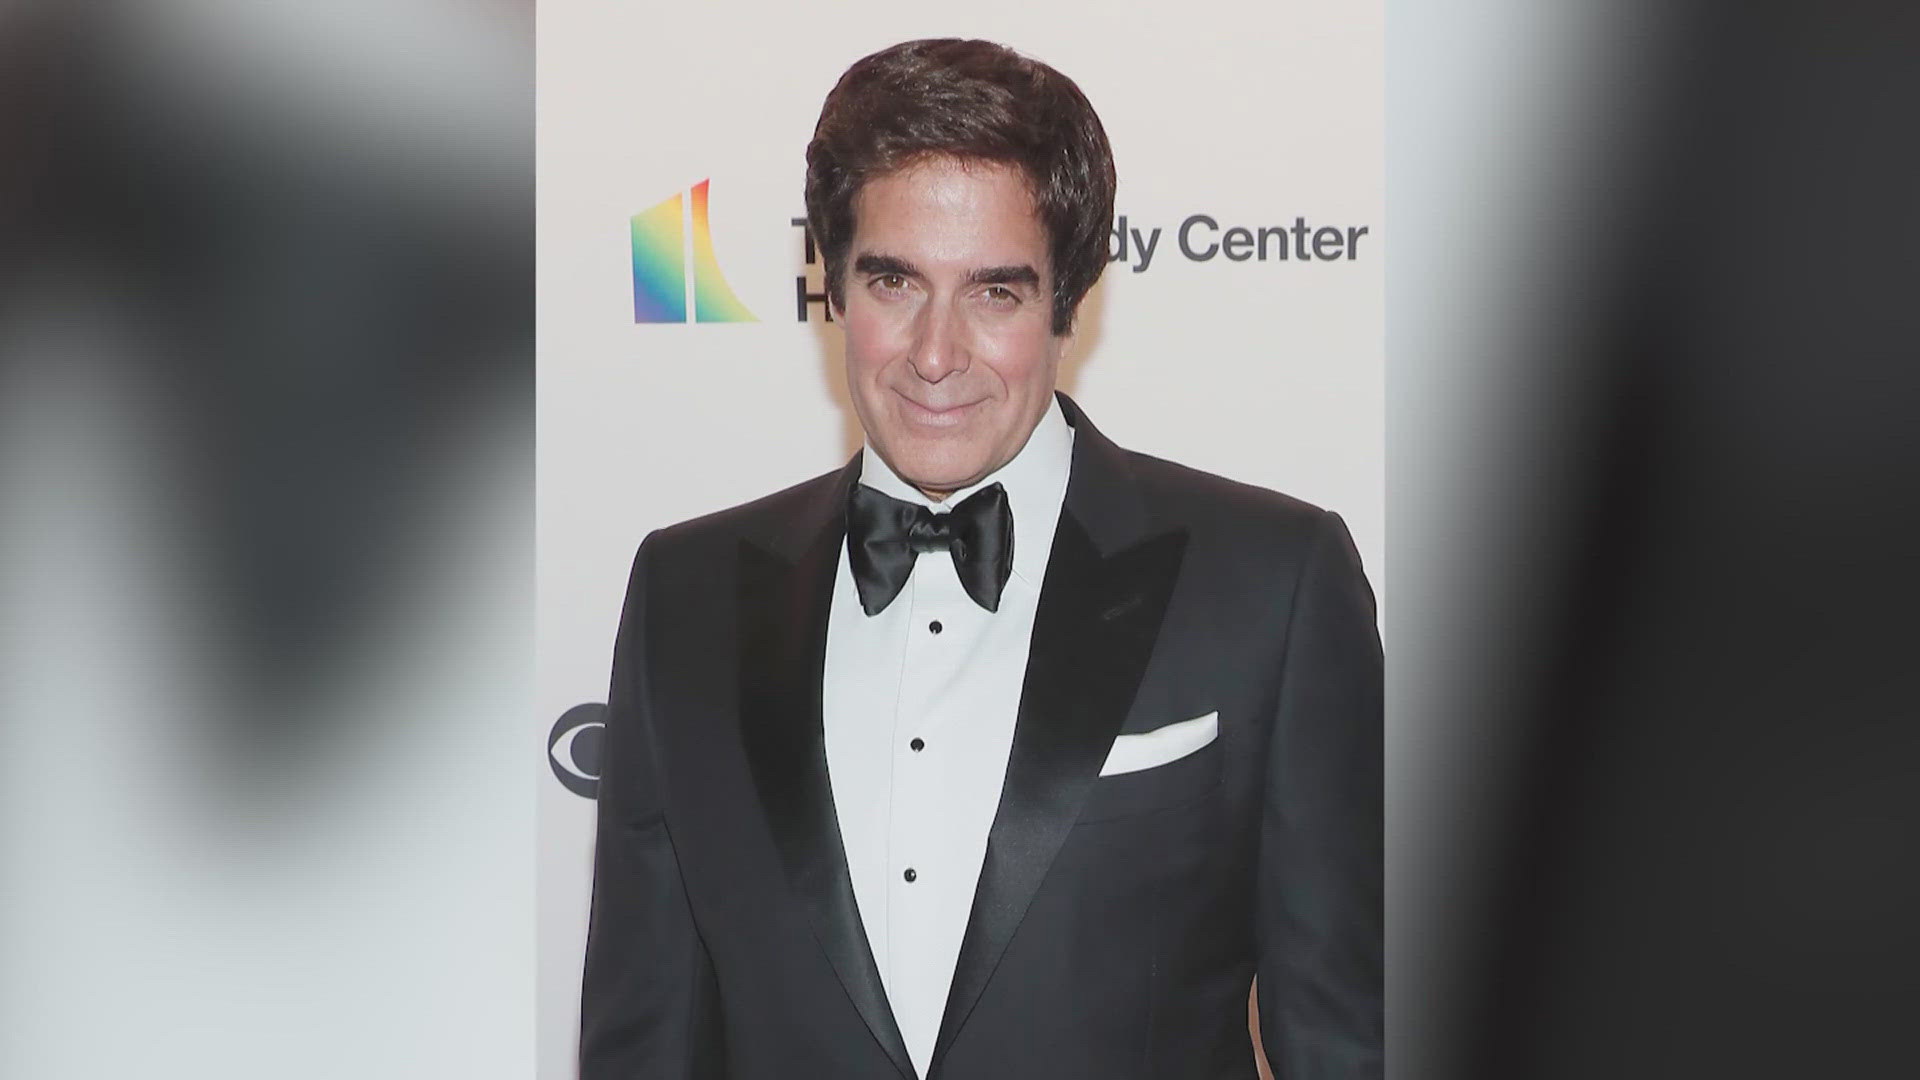 Copperfield is facing allegations of misconduct from more than a dozen women, at least half of whom say they were underage when he allegedly groomed or groped them.